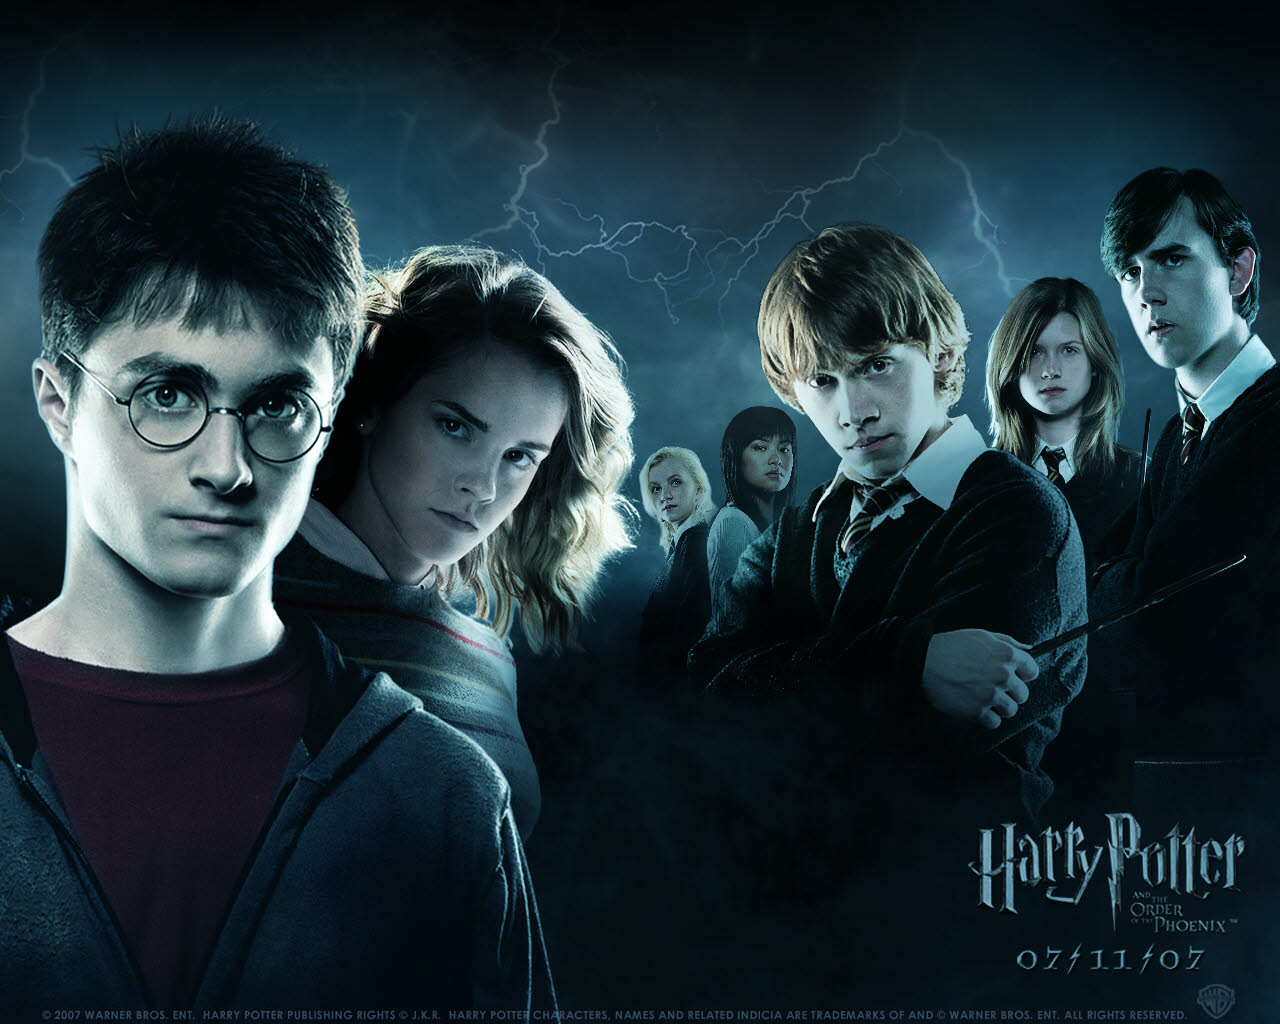 http://3.bp.blogspot.com/-WyLbsXFbaEQ/Tlz5QHycQcI/AAAAAAAAADo/9Ol6CFdq9Ws/s1600/Harry-Potter-And-The-Deathly-Hallows-Part-2-Wallpapers.jpg#Harry%20potter%20deathly%20hallows%20part%20two%201280x1024